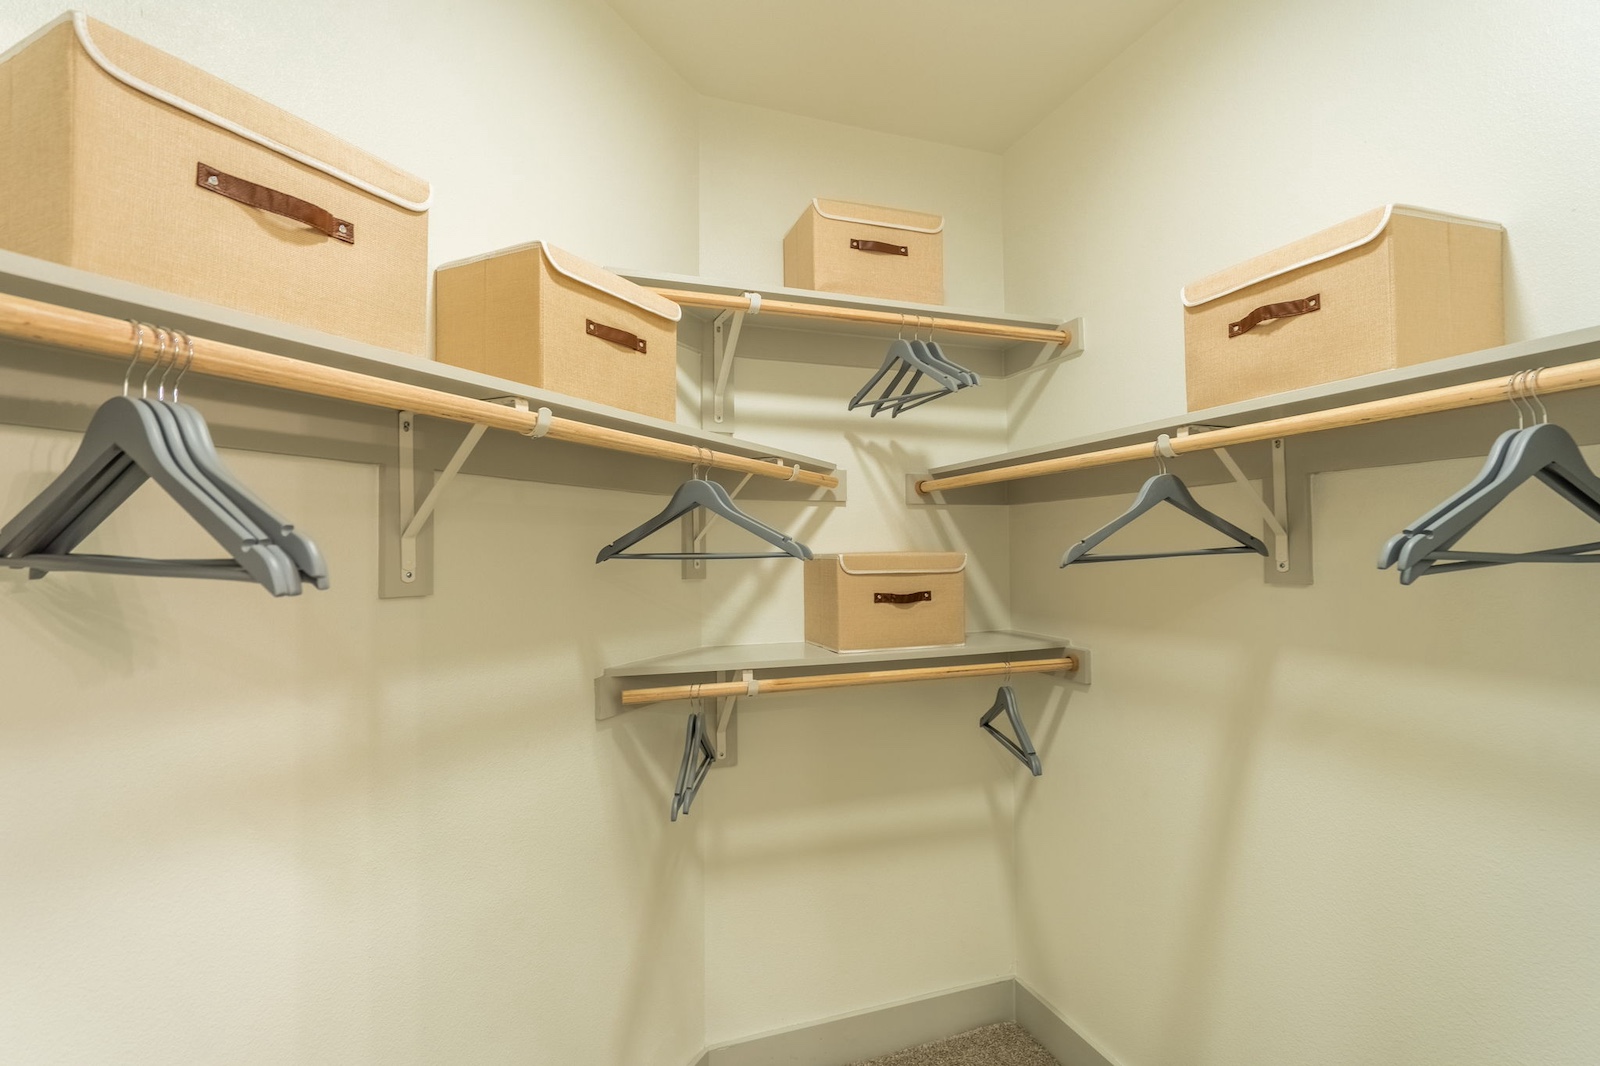 Walk-in closet at our apartments in Cypress, Texas. Residences